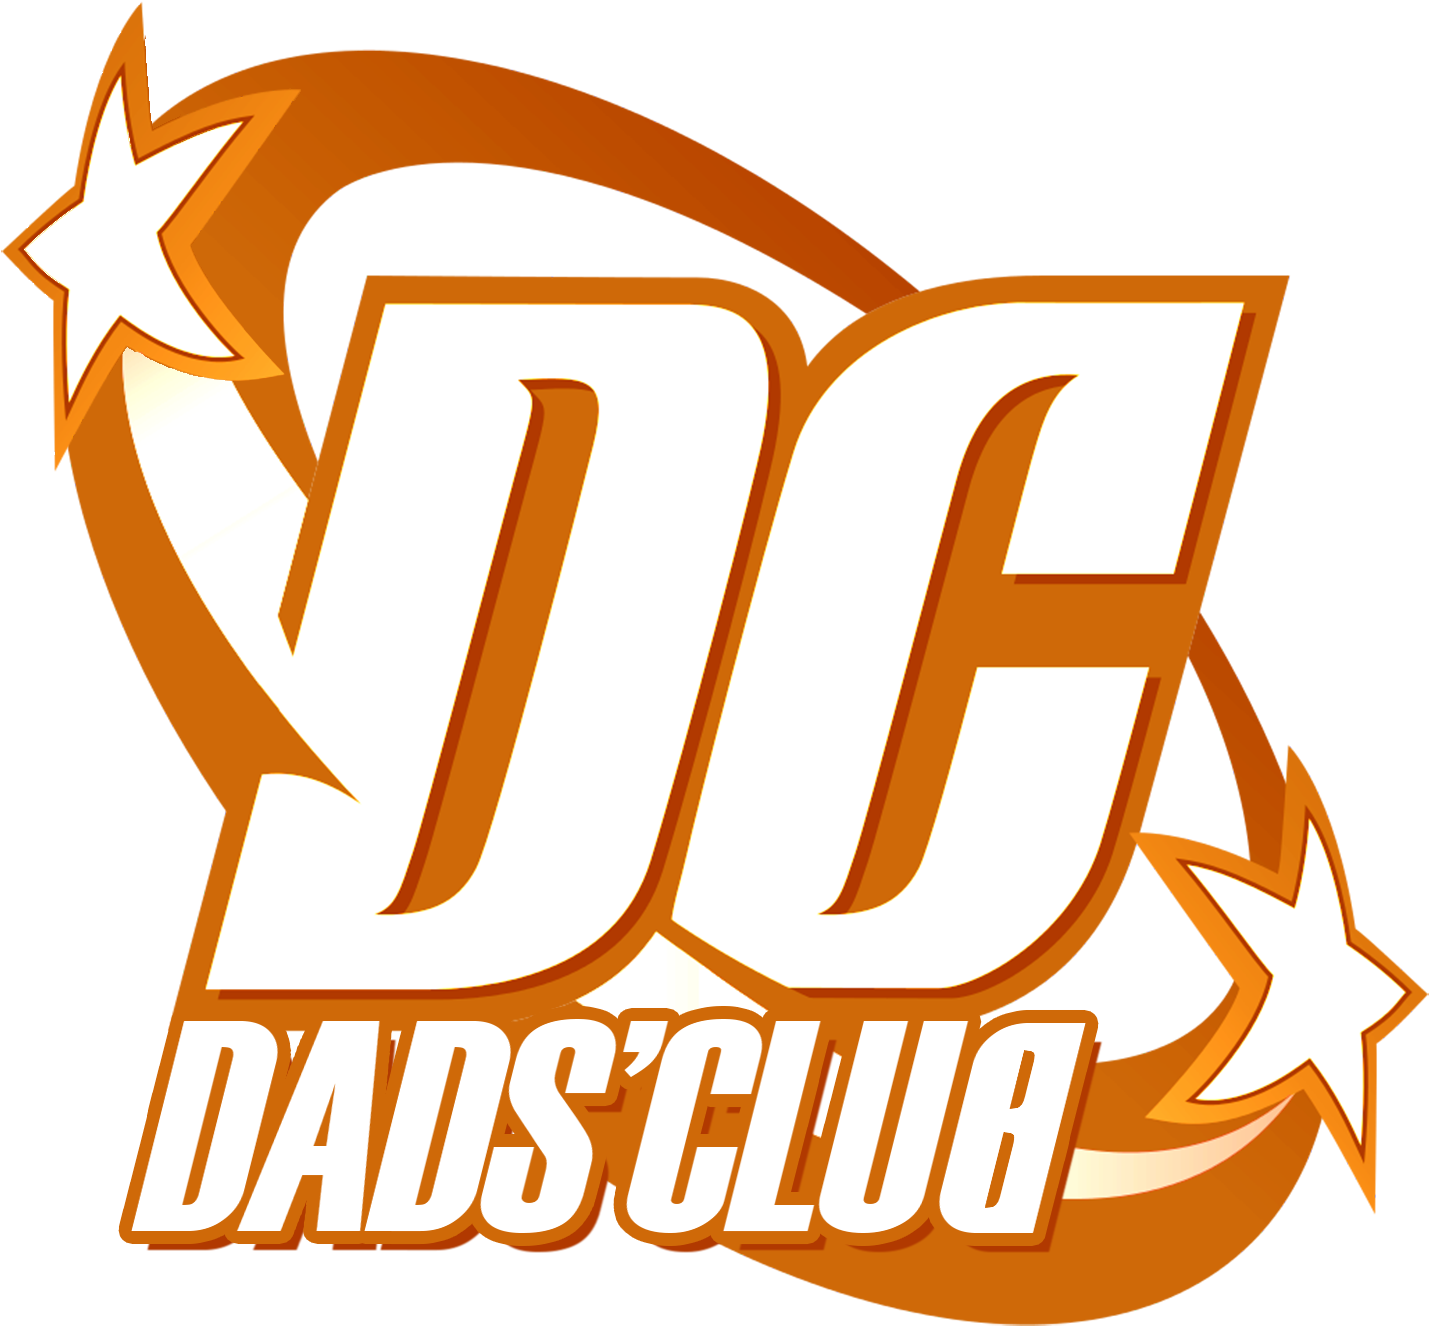 About The Dads' Club - Dc Comics Logo 2015 (1459x1422)